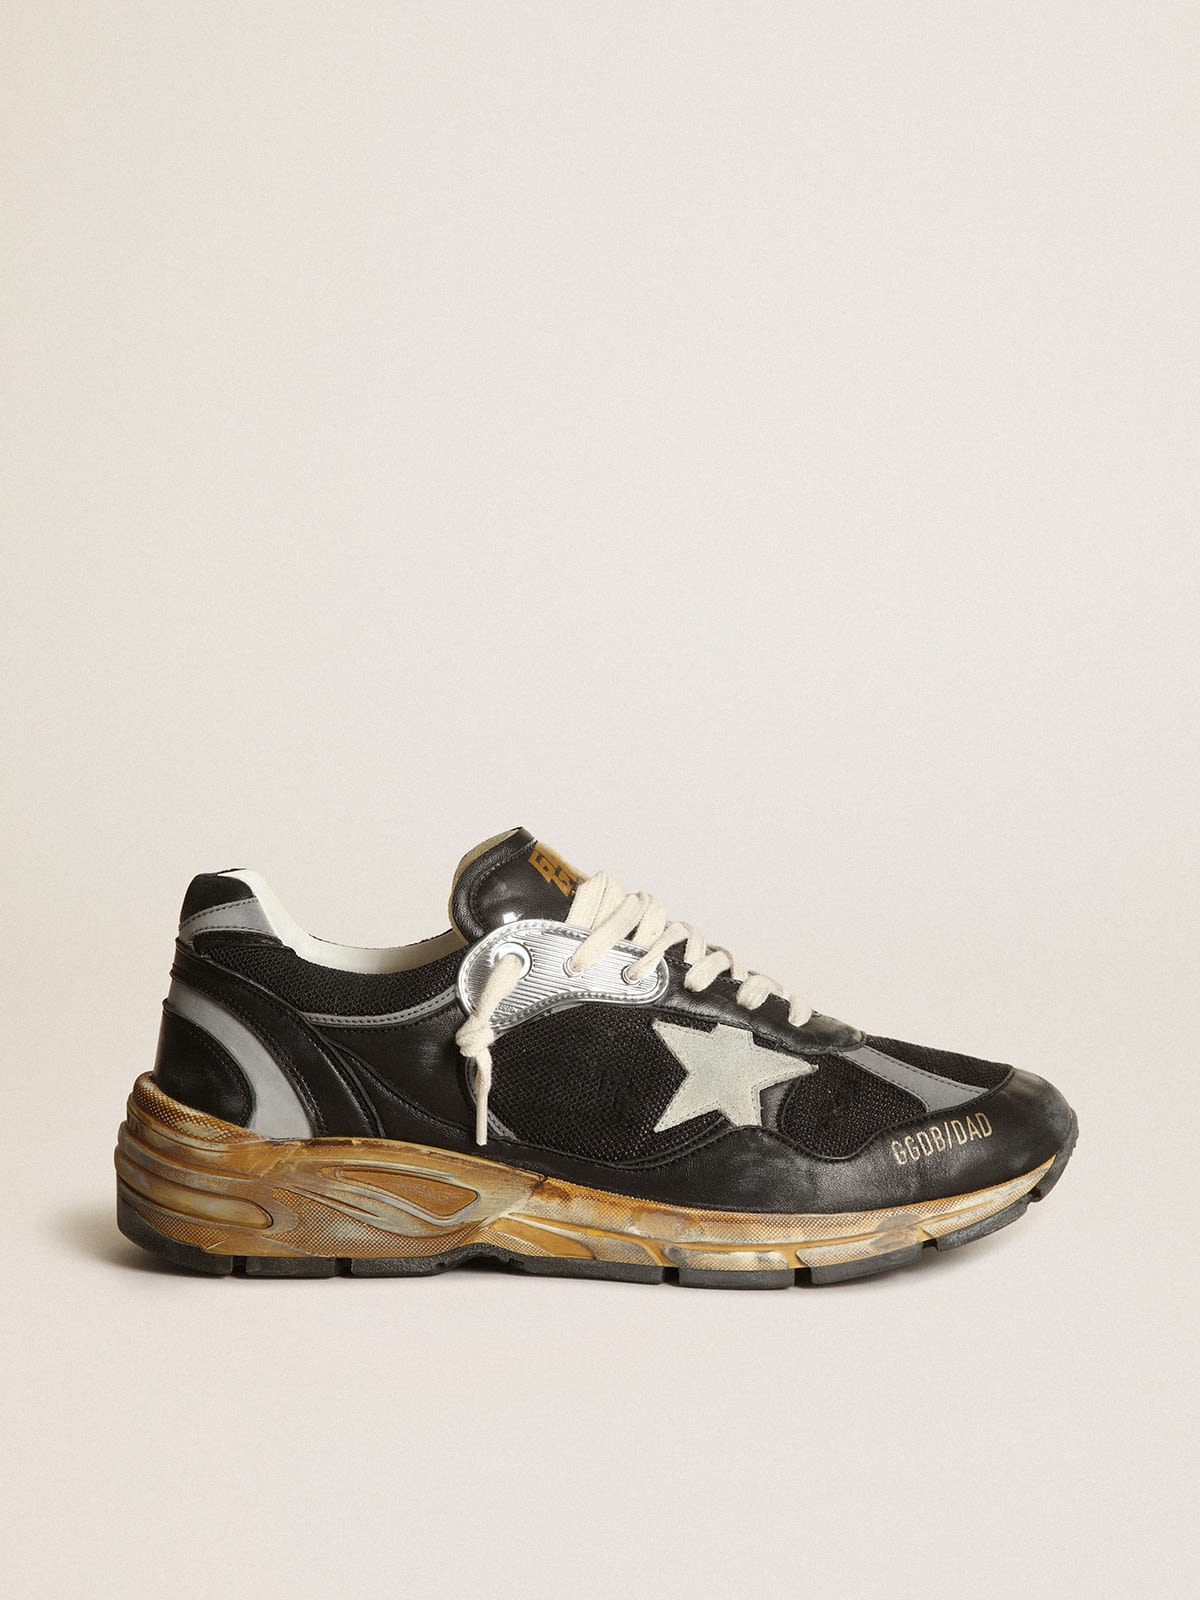 Women’s Dad-Star sneakers in black mesh and nappa leather with ice-gray suede star - 1